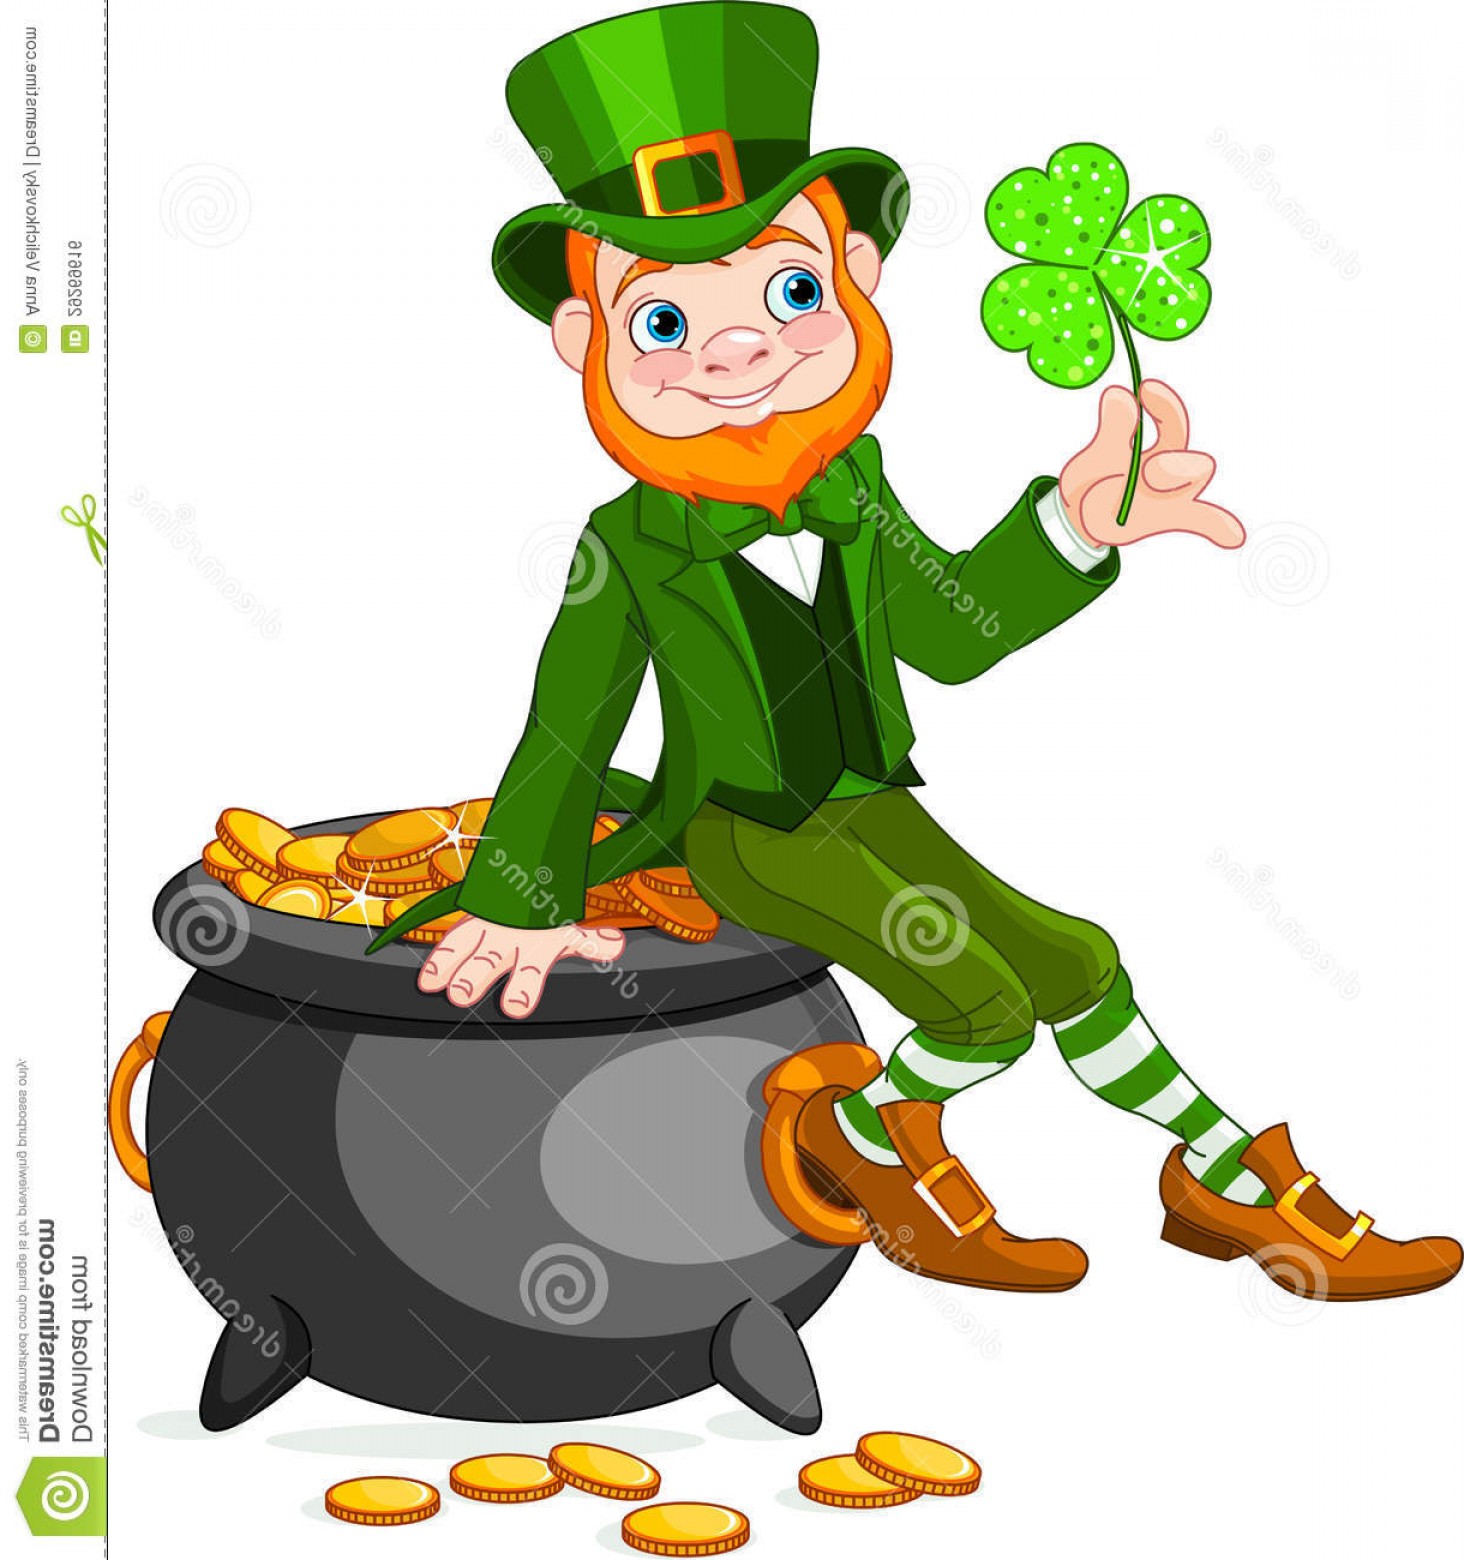 874 Pot Of Gold free clipart.